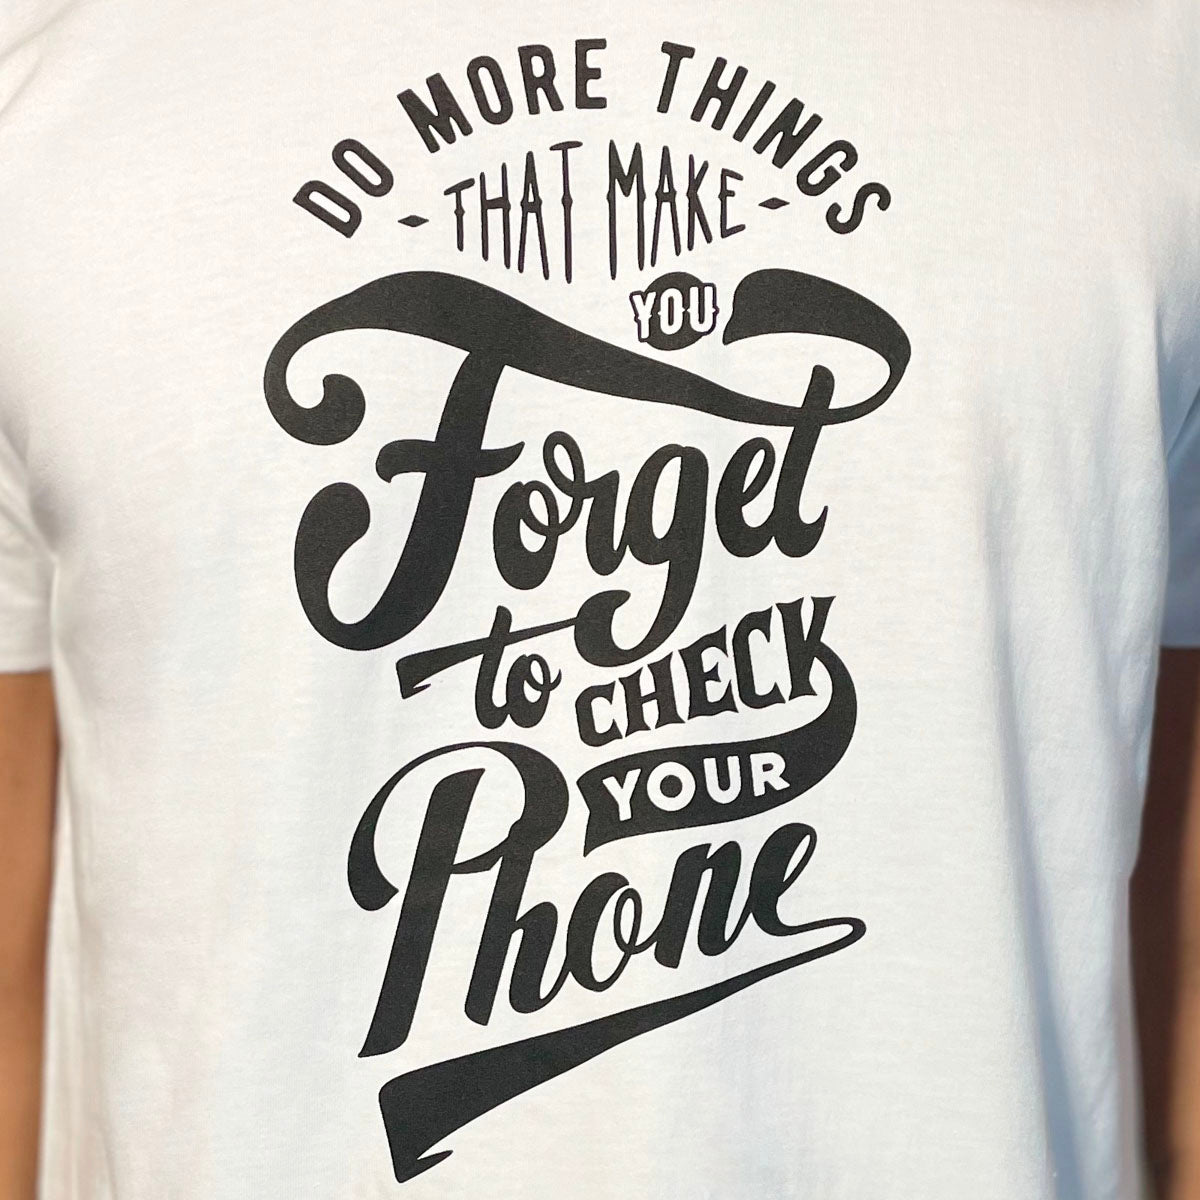 T-Shirt à manches courtes "Do more things"